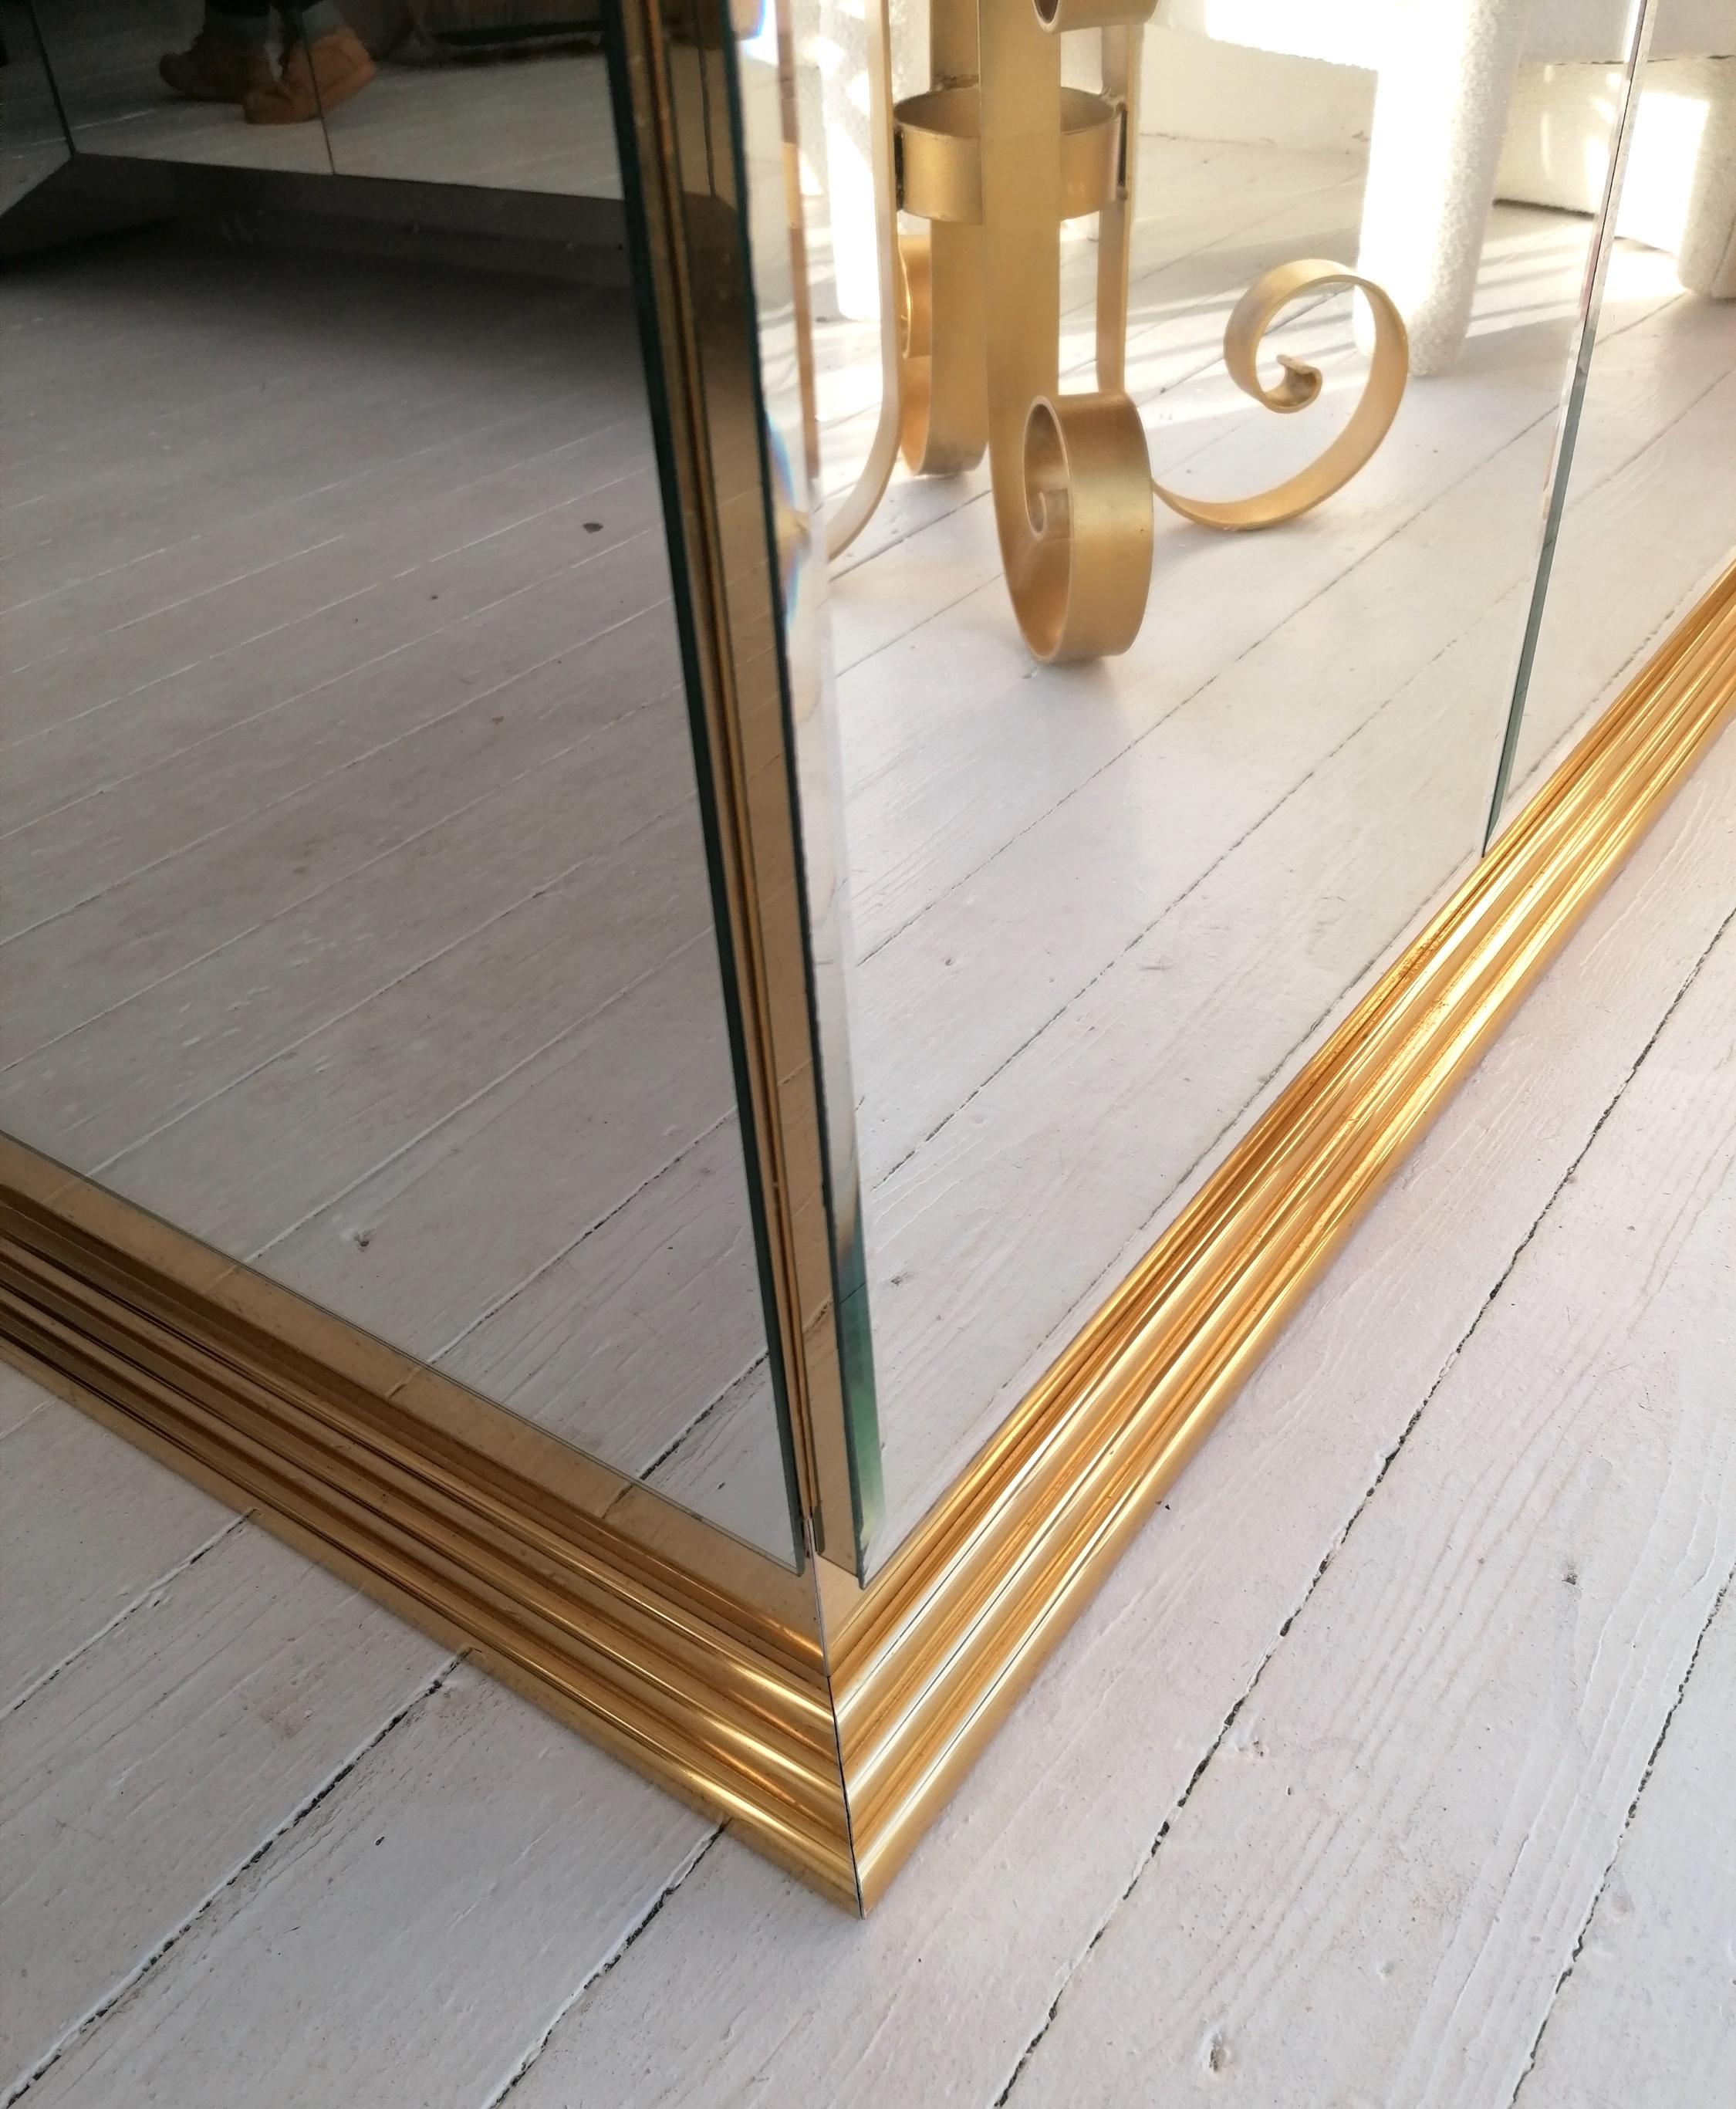 Vintage Mirrored Sideboard with Brass Base, by Ello Furniture USA, 1970s / 80s 3